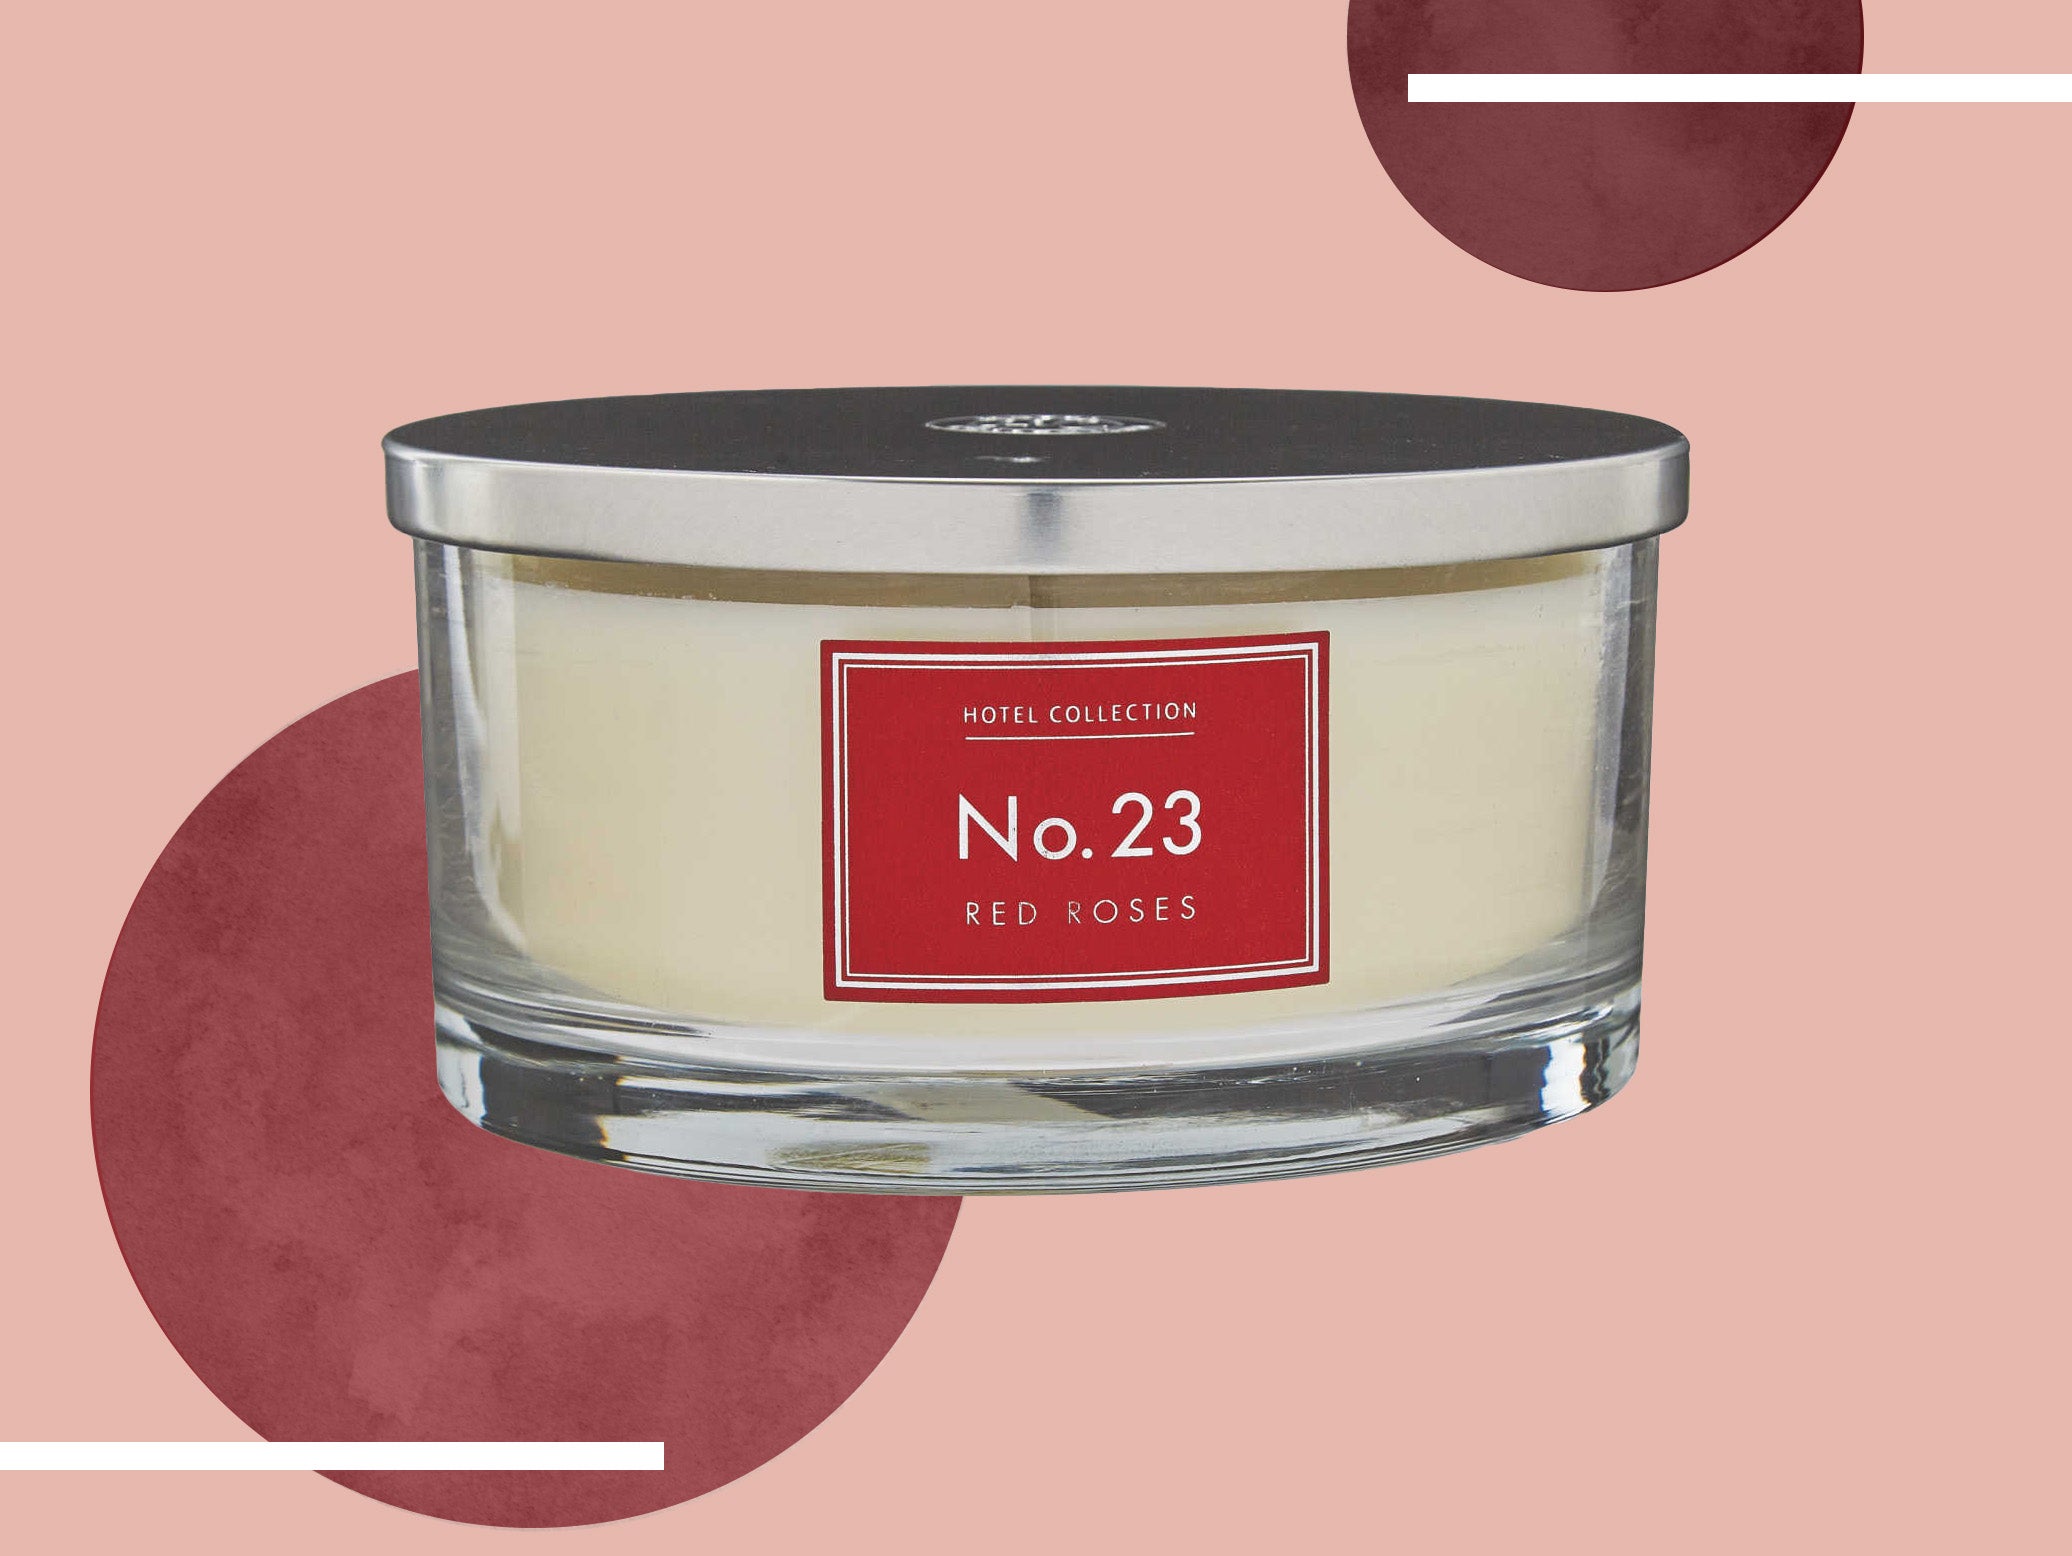 Aldi has unveiled its Valentine’s Day candle and we’re getting serious Jo Malone vibes